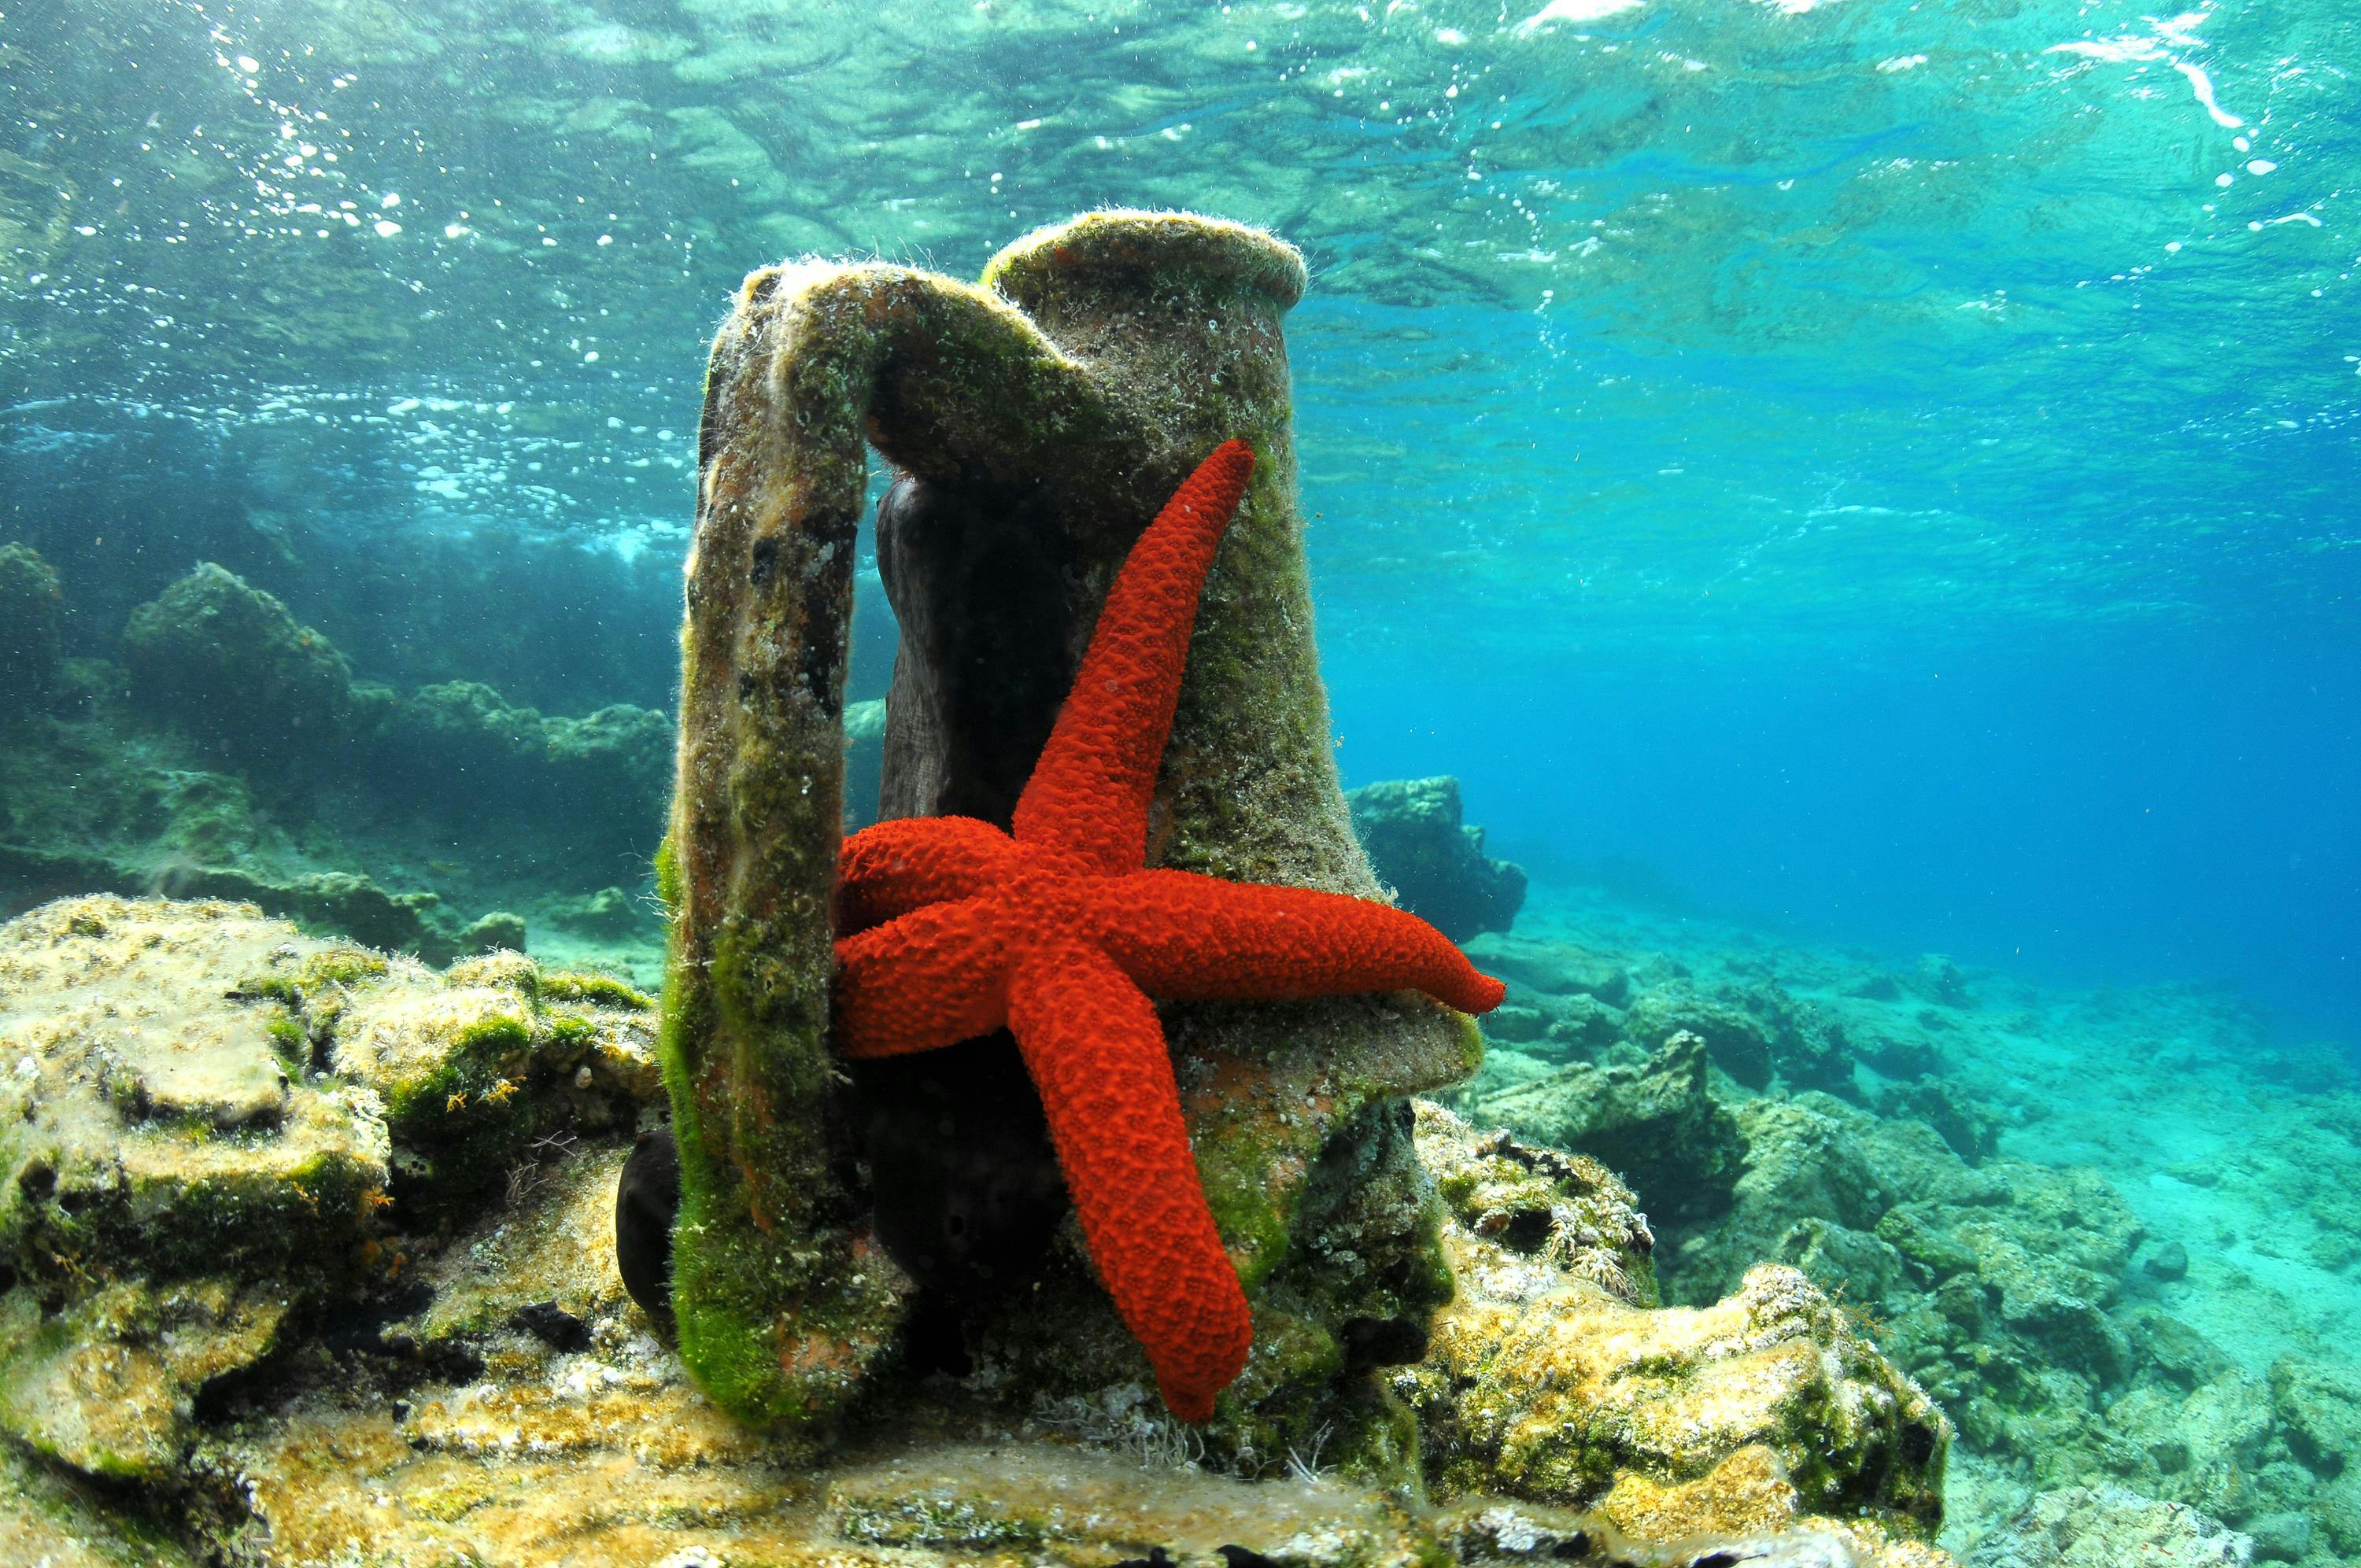 An ancient amphora and a red seastar together with a wavy background